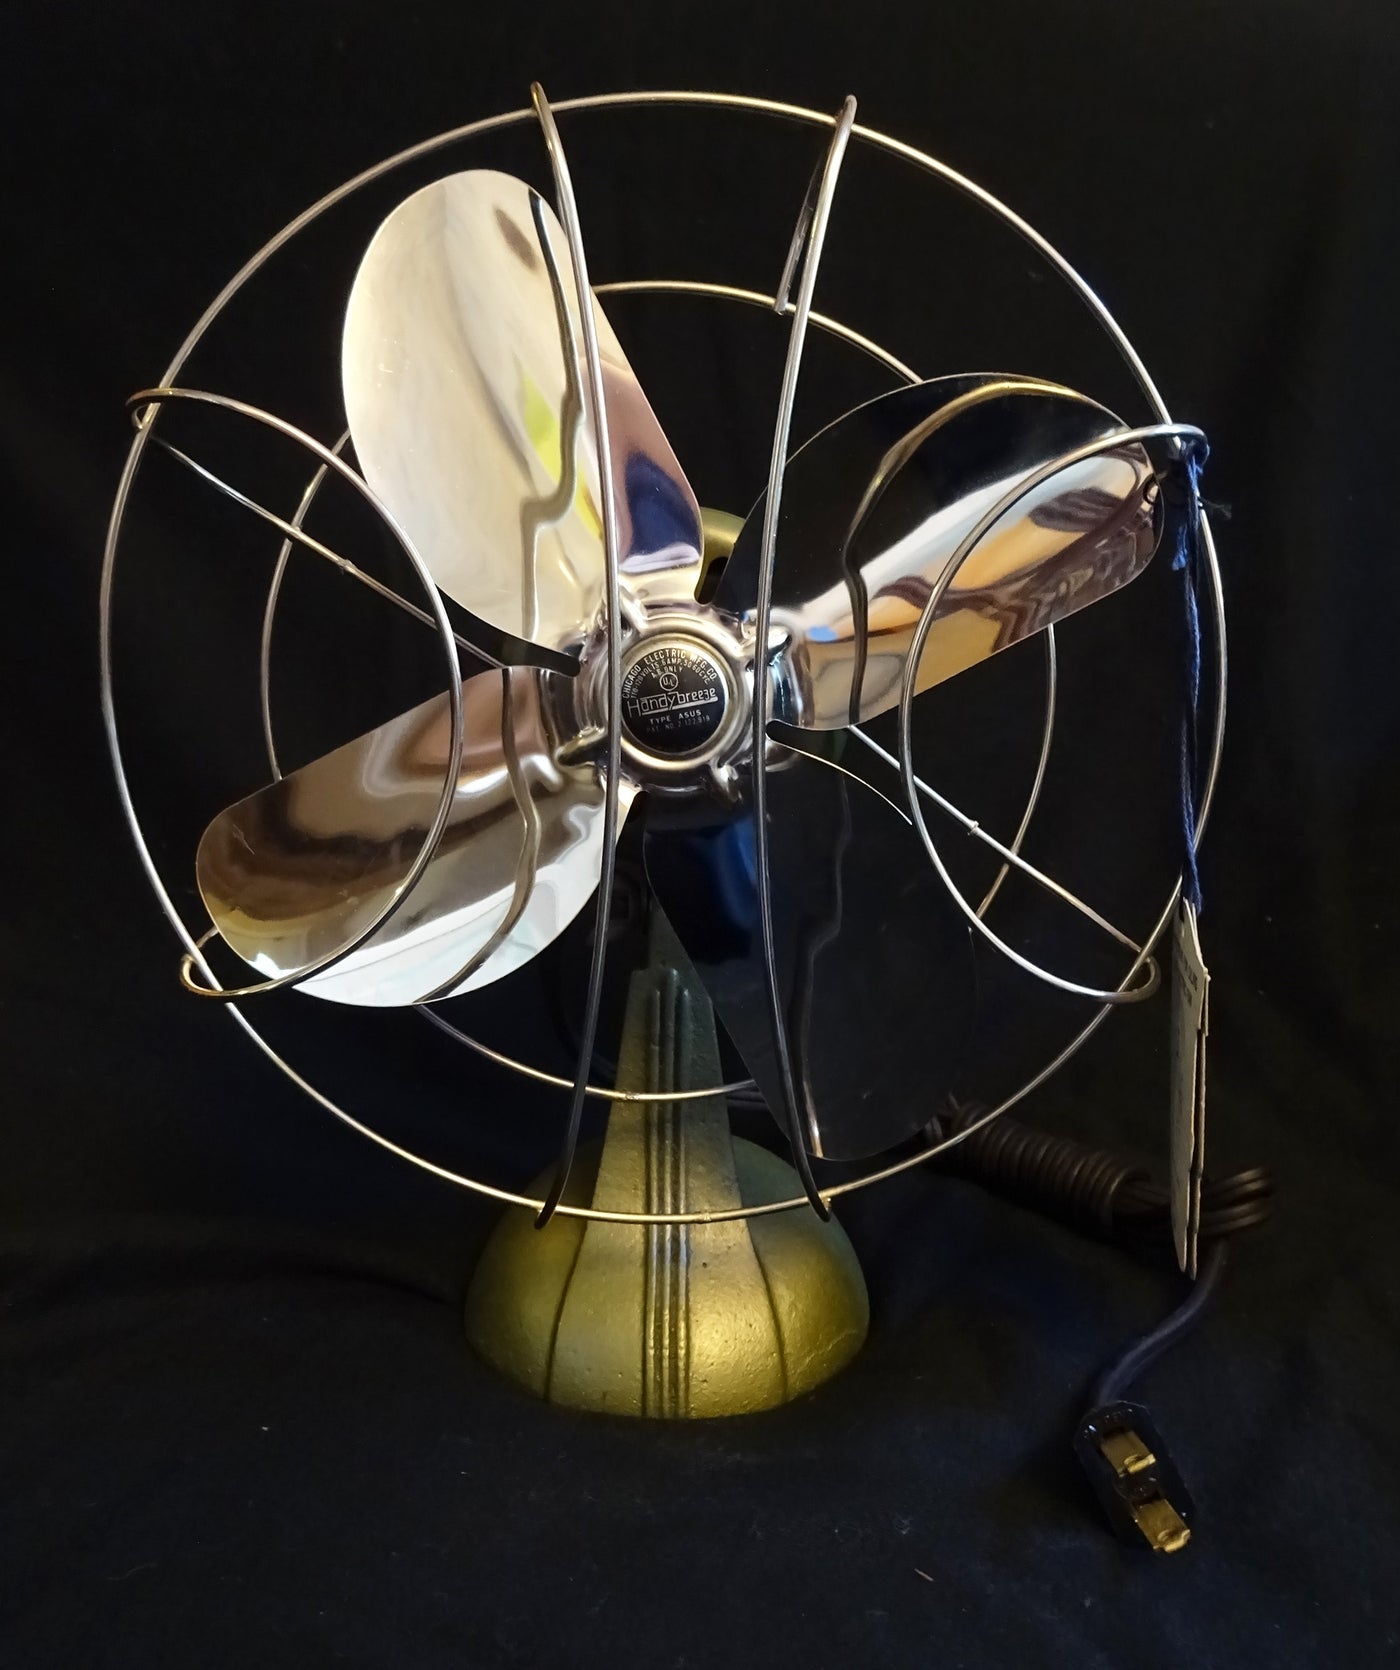 Chicago Electric Handybreeze TYPE ASUS desk fan w-orginal tags